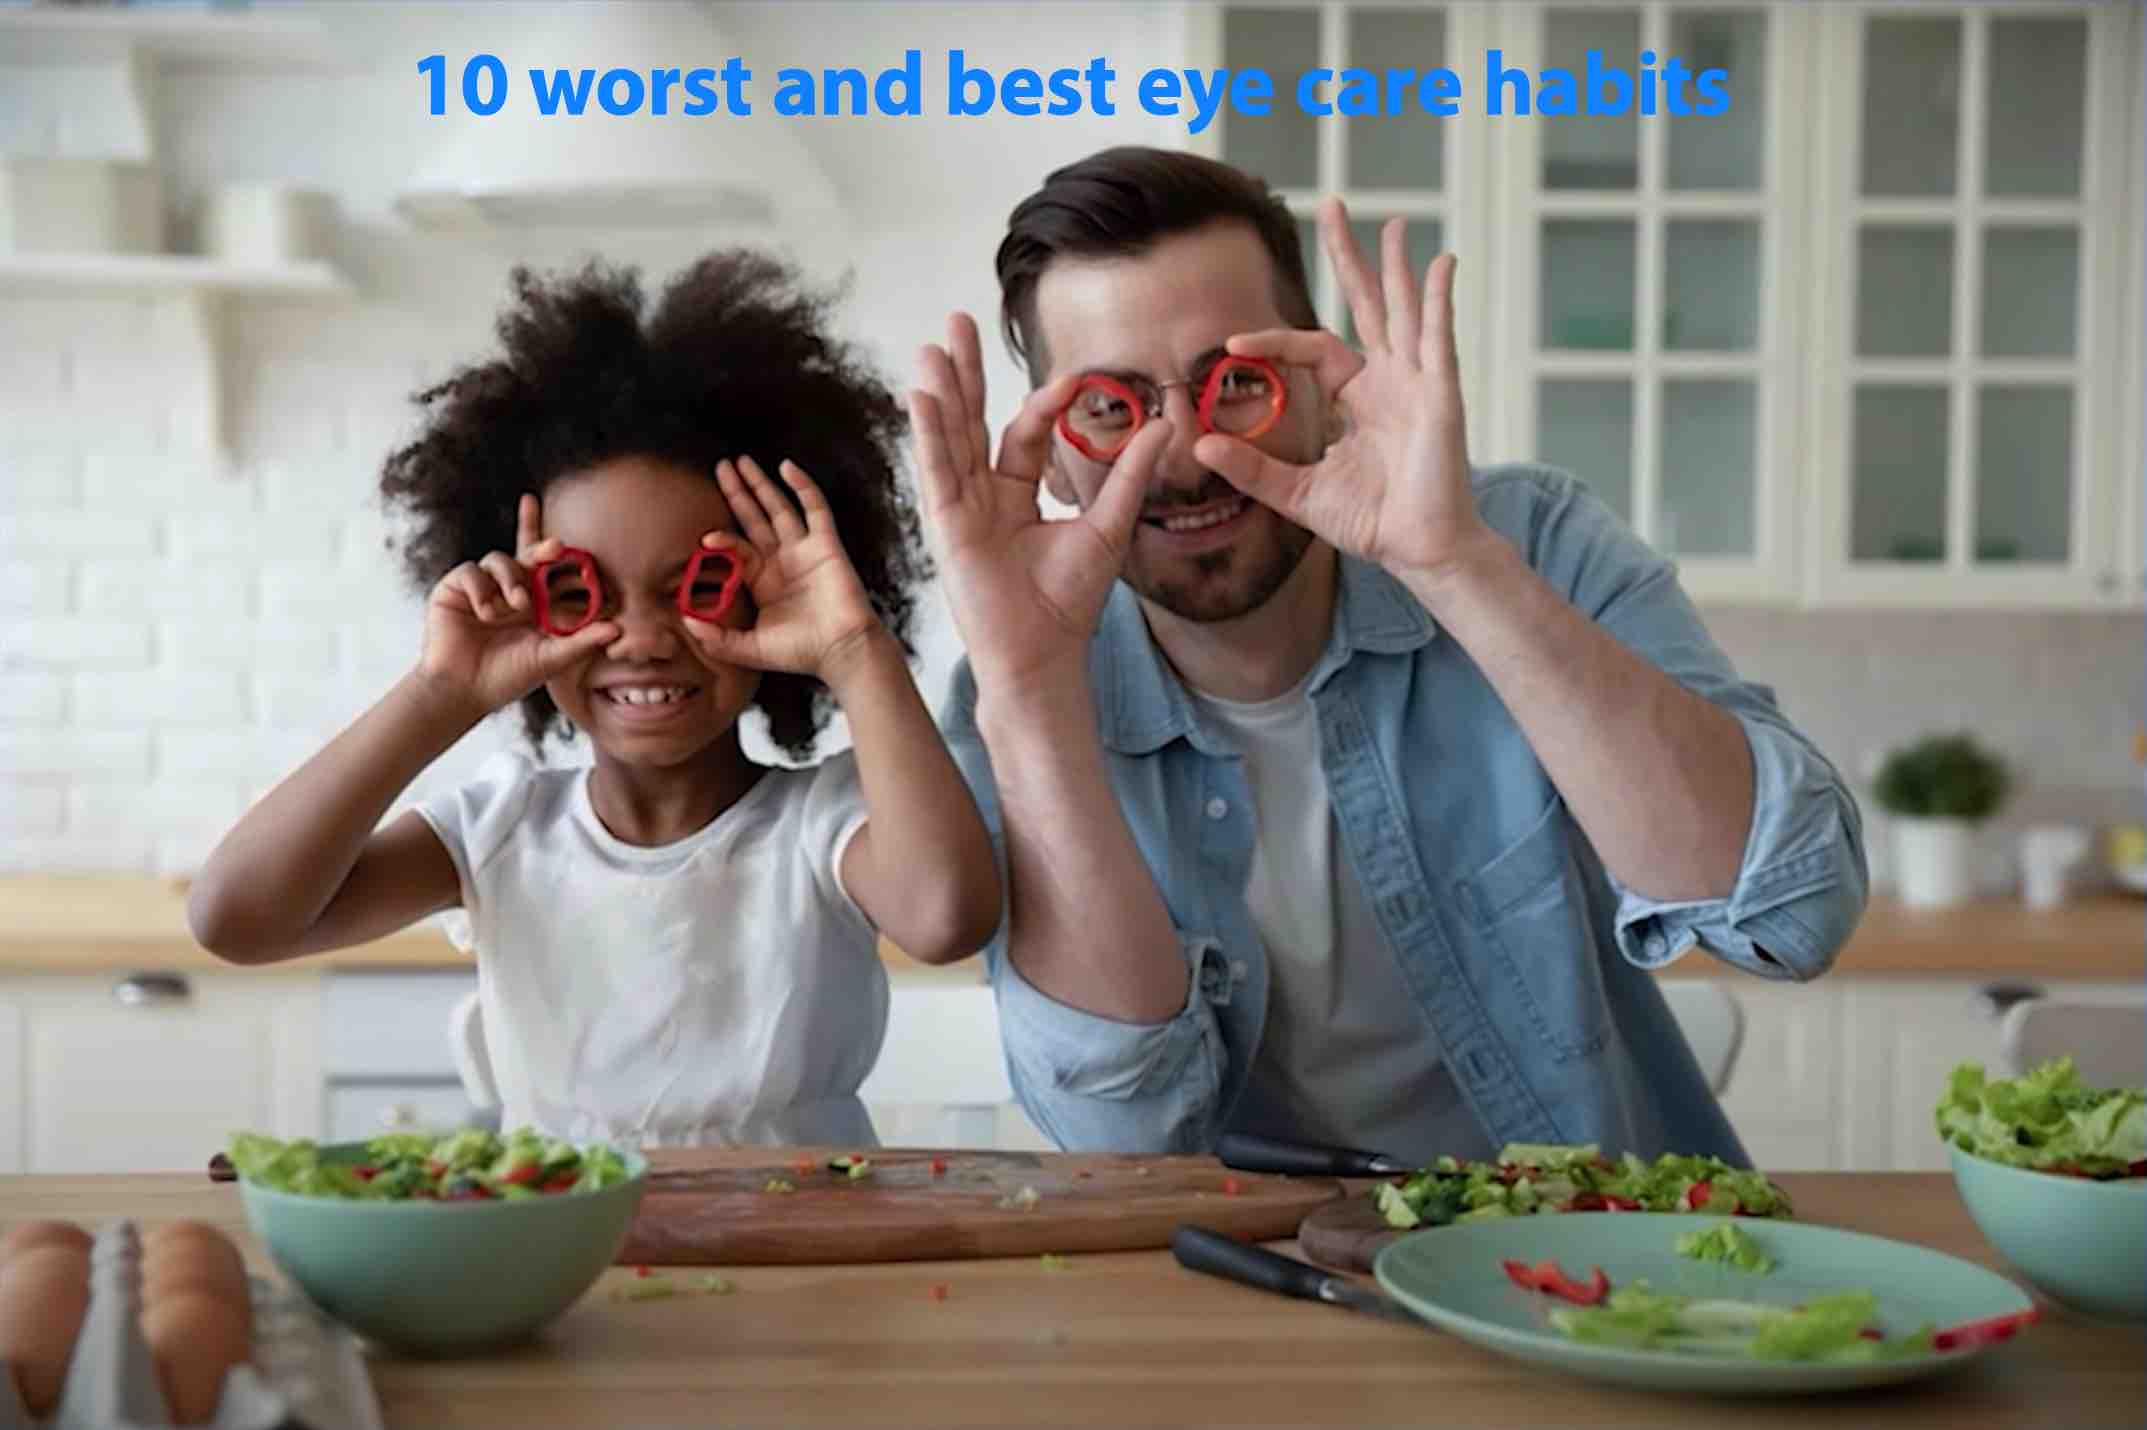 10 worst and best eye care habits